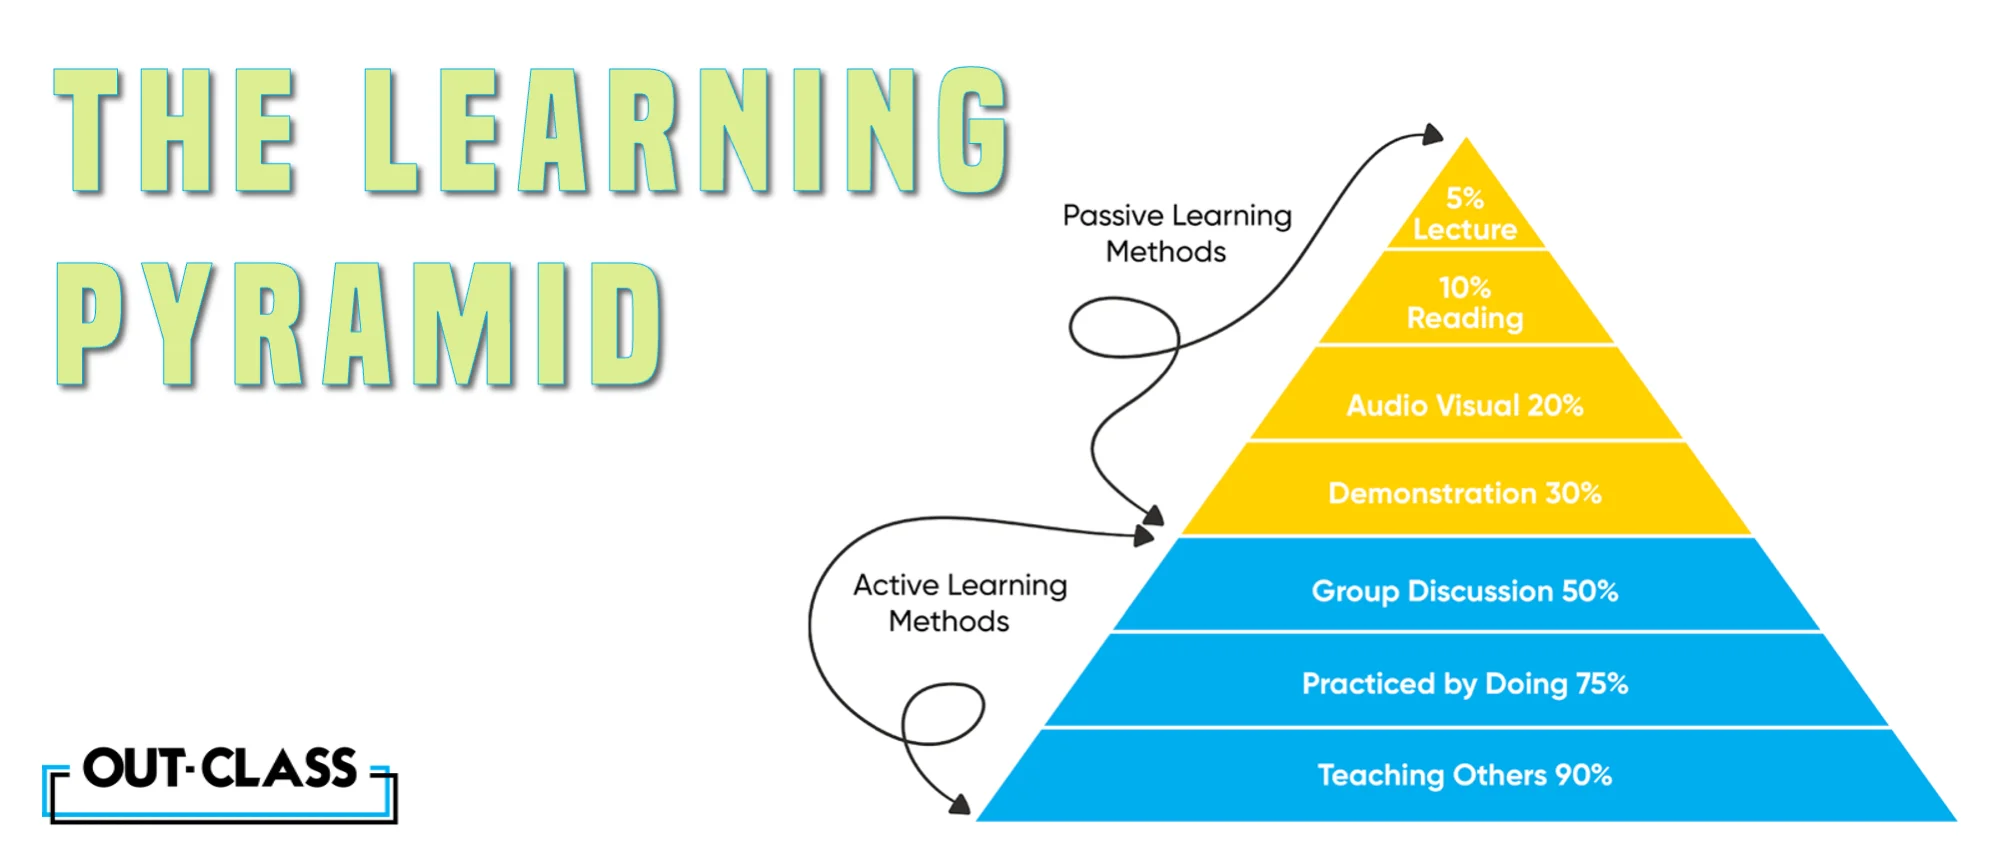 The learning pyramid shows how a mix of both active learning and passive learning is the way forward in terms of studying.